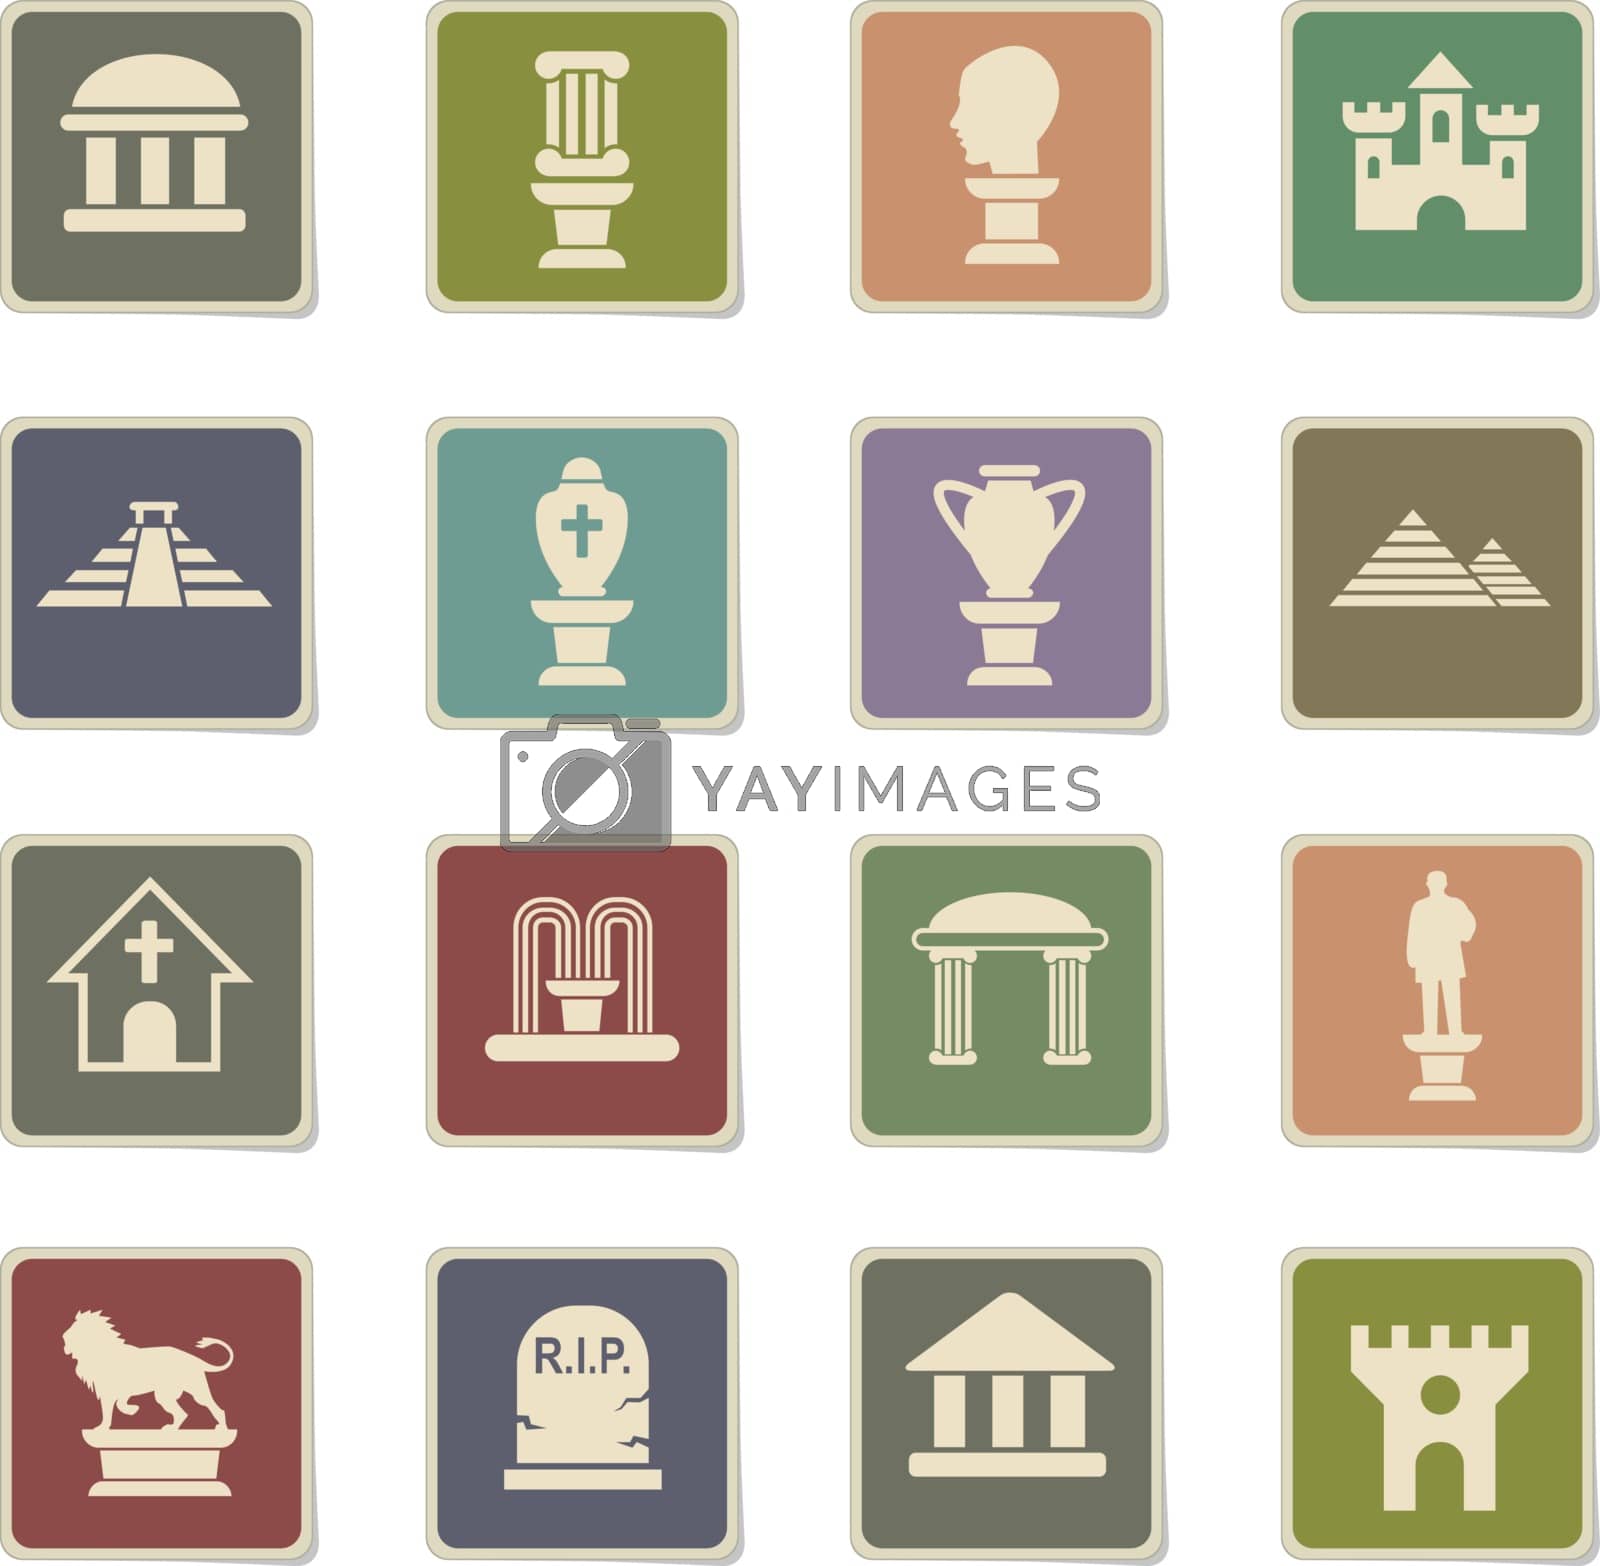 Royalty free image of monuments icon set by ayax